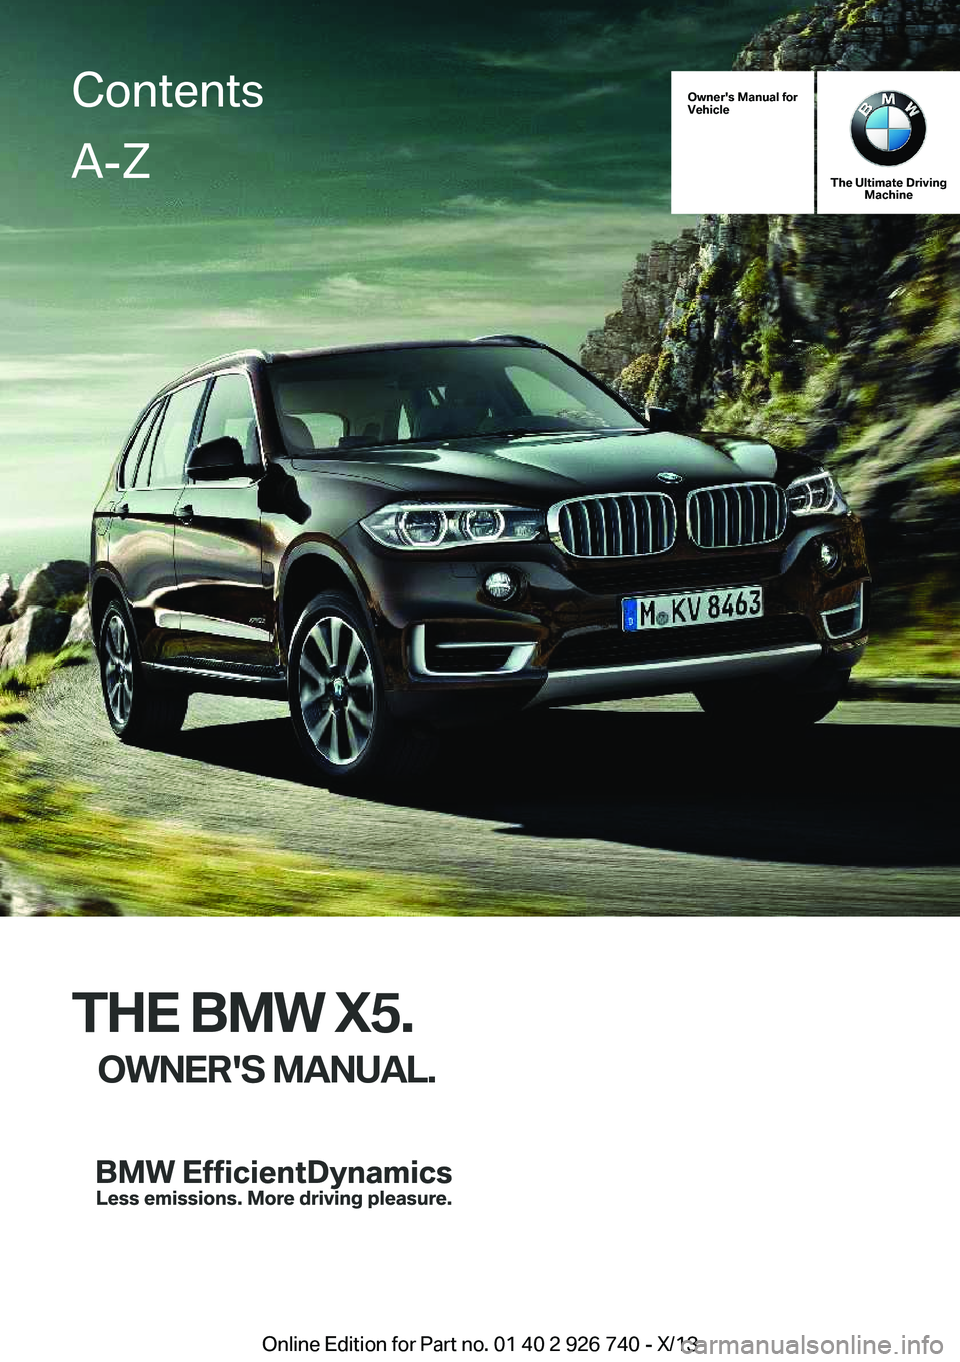 BMW X5 XDRIVE35D 2014  Owners Manual Owner's Manual for
Vehicle
The Ultimate Driving Machine
THE BMW X5.
OWNER'S MANUAL.
ContentsA-Z
Online Edition for Part no. 01 40 2 926 740 - X/13   